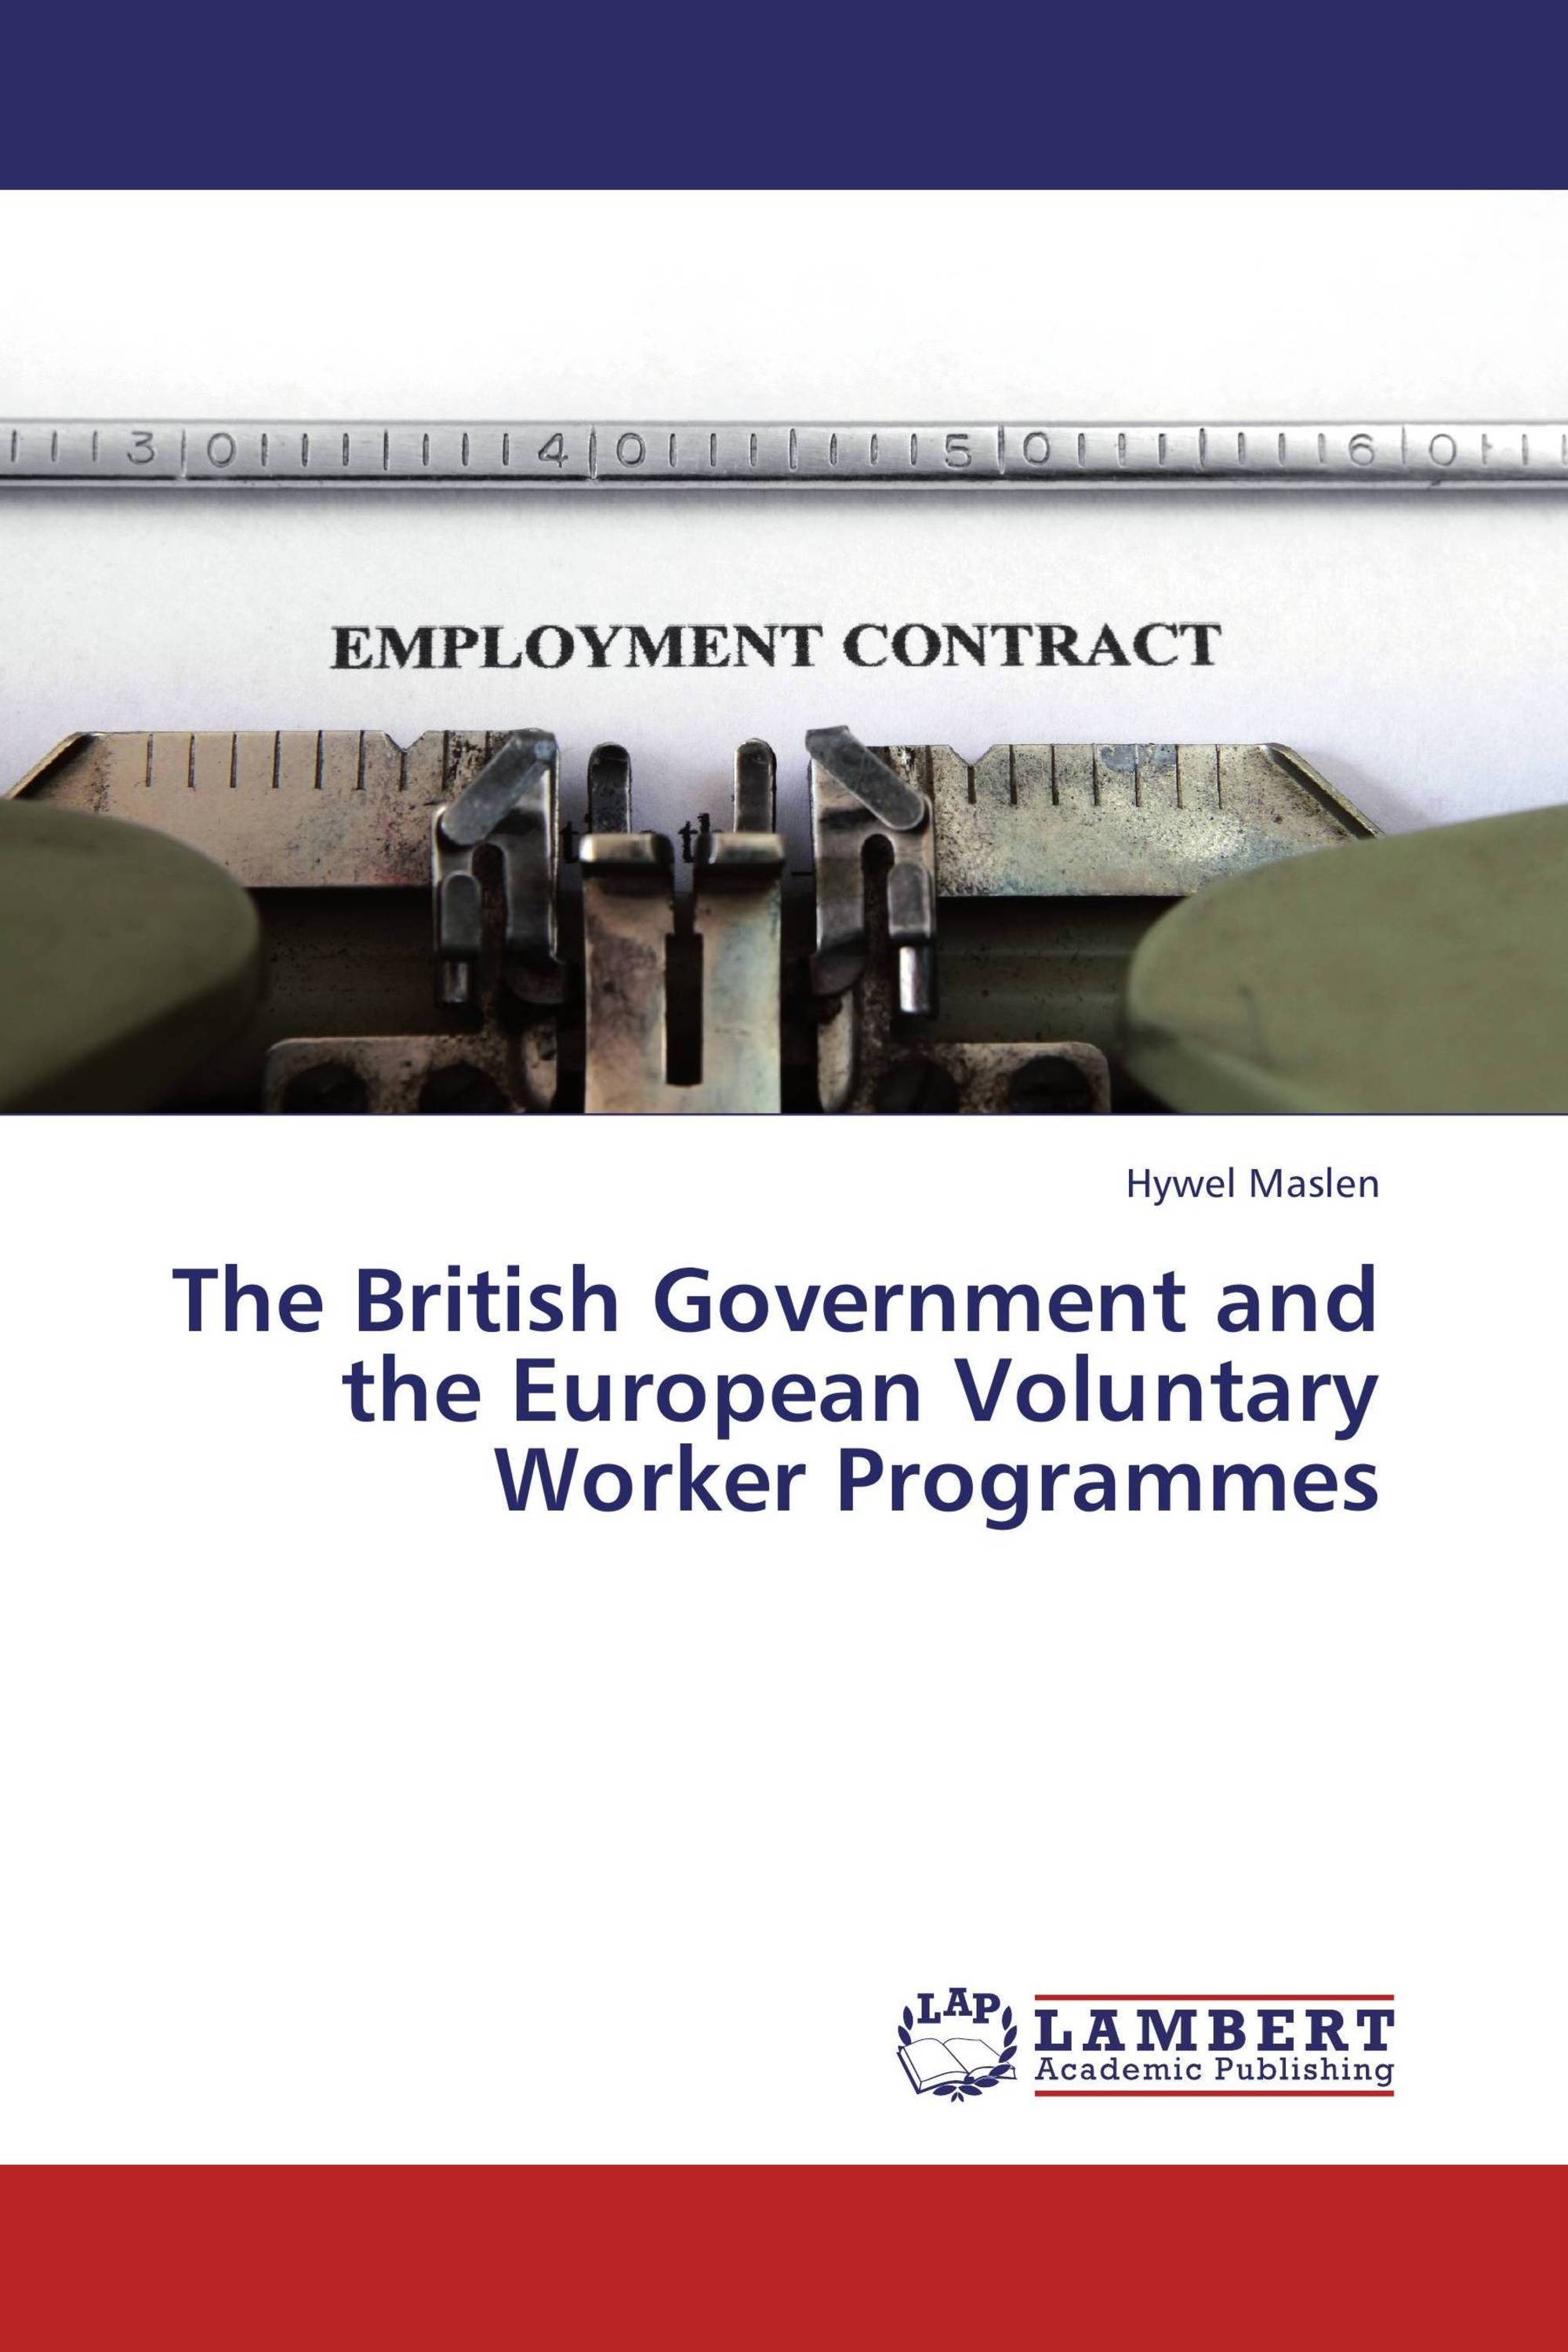 The British Government and the European Voluntary Worker Programmes